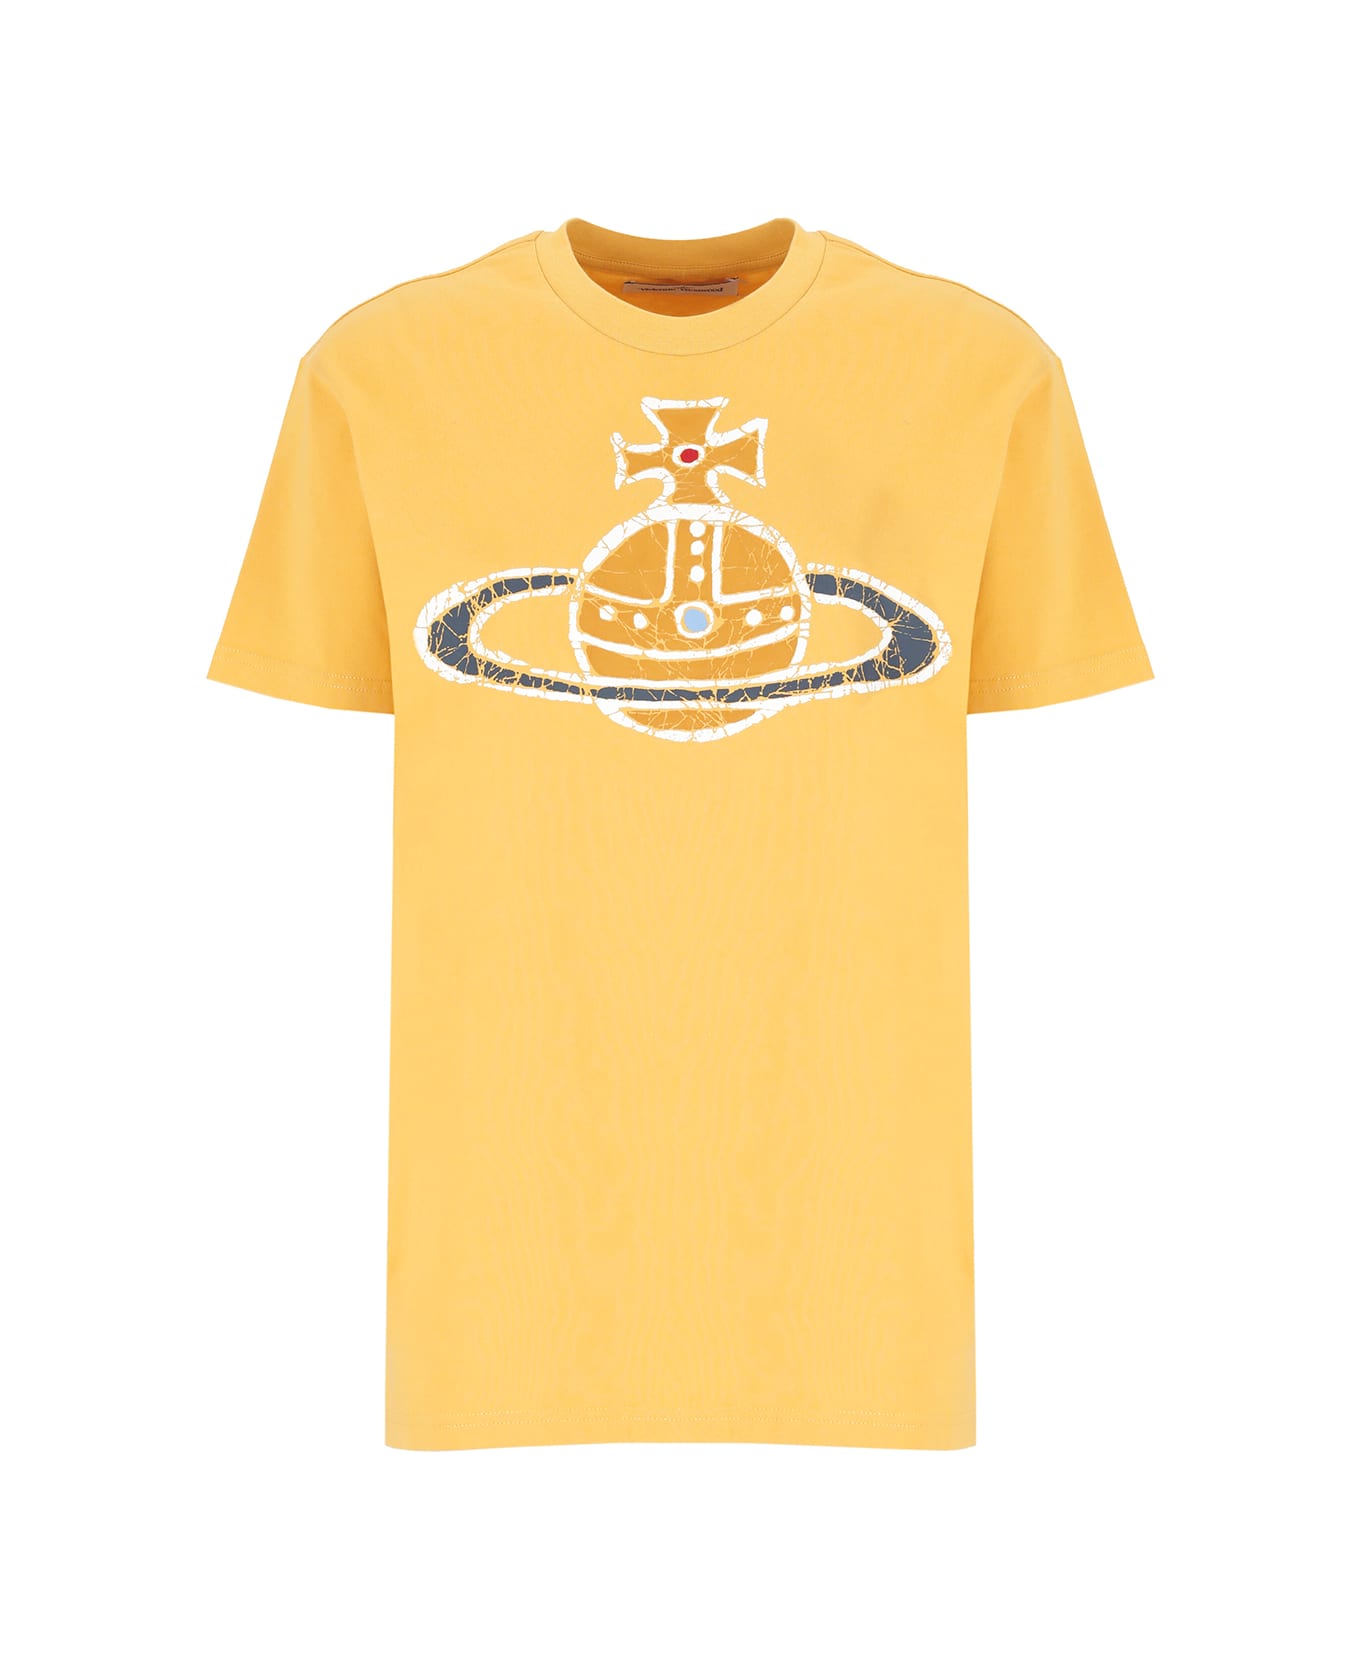 Vivienne Westwood Time Machine Classic T-shirt - Yellow